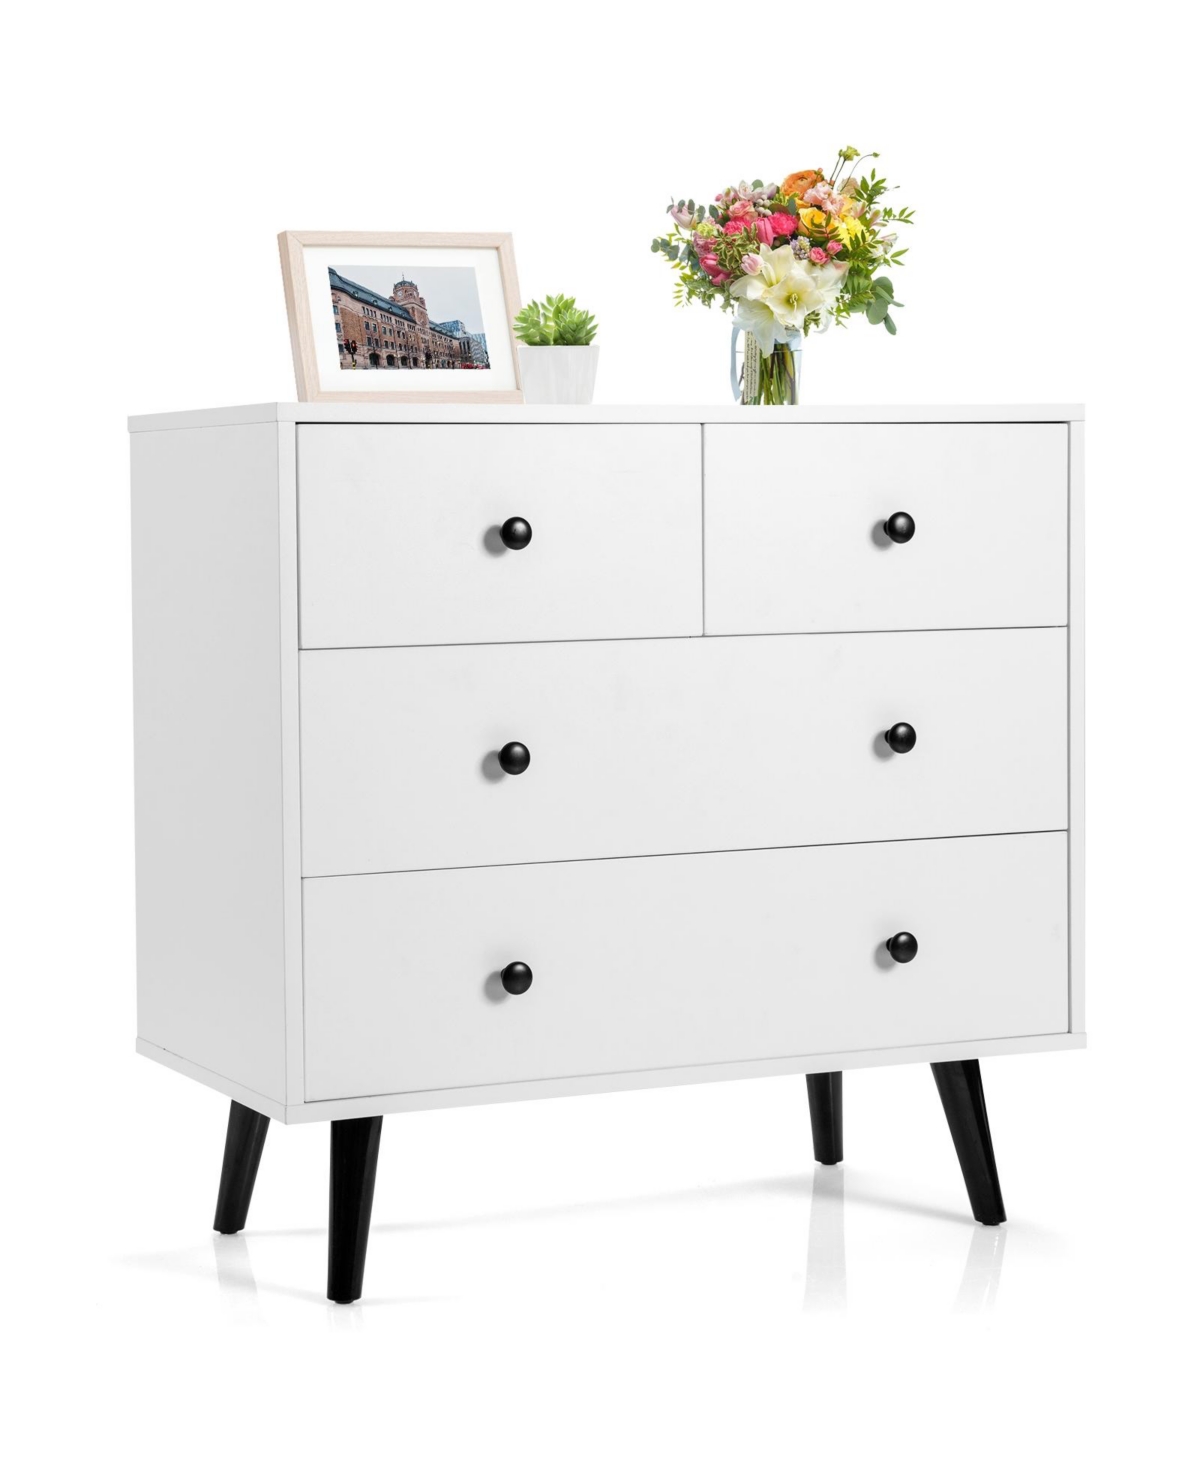 4 Drawers Dresser Chest of Drawers Free Standing Sideboard Cabinet-White - White